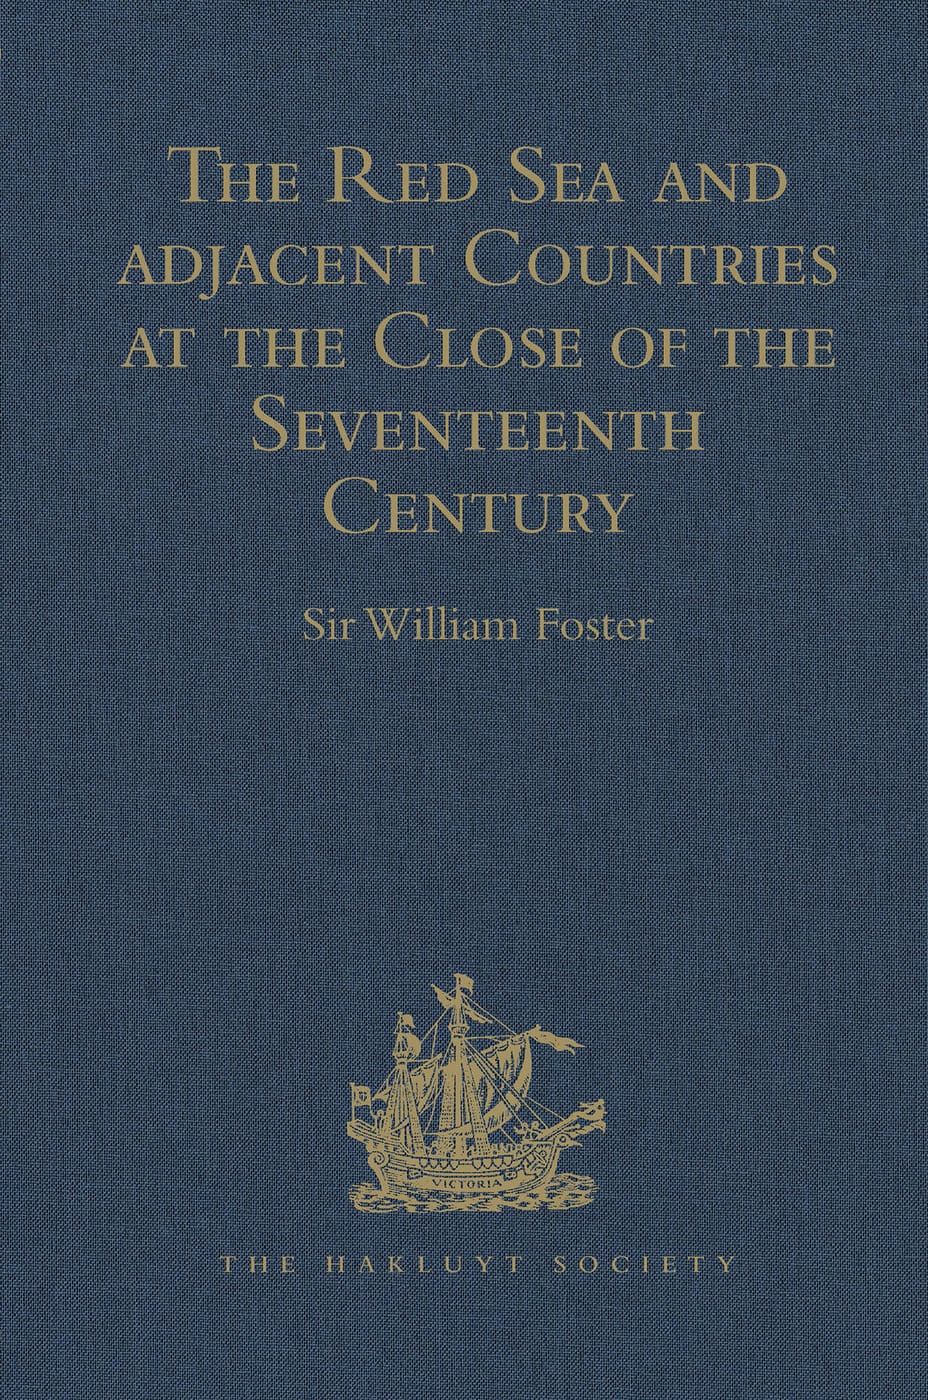 The Red Sea and Adjacent Countries at the Close of the Seventeenth Century: As Described by Joseph Pitts, William Daniel, and Charles Jacques Poncet